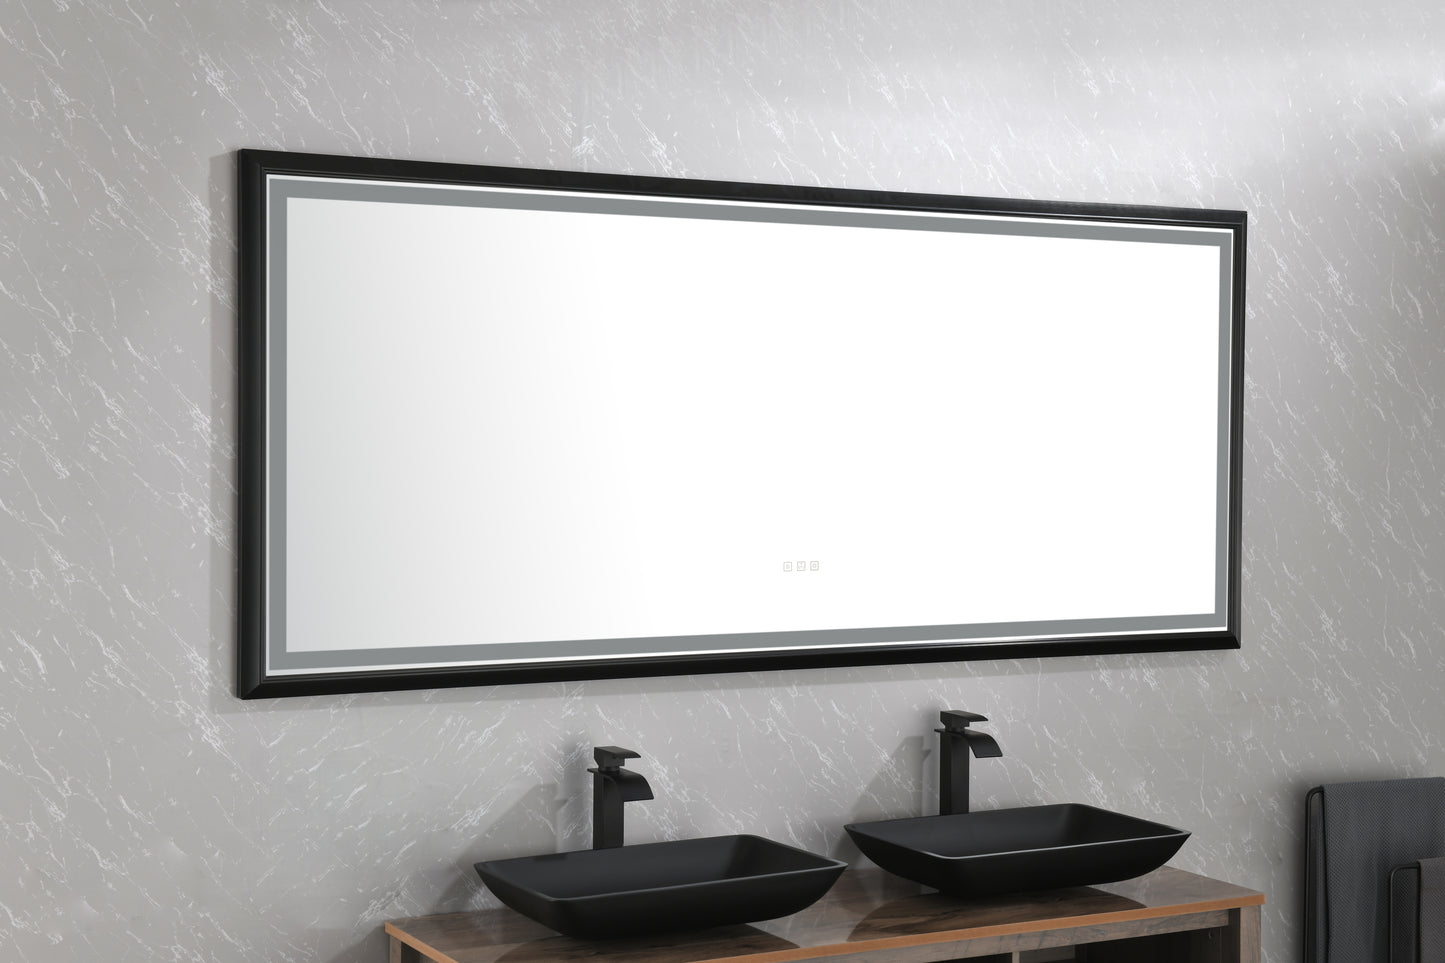 LTL needs to consult the warehouse address88*38 Black Framed Metal FrameBathroom Mirror Square Wall-Mounted Material Framed Explosion-Proof \\nVanity Mirror Shaving Mirror Magnifying Mirror